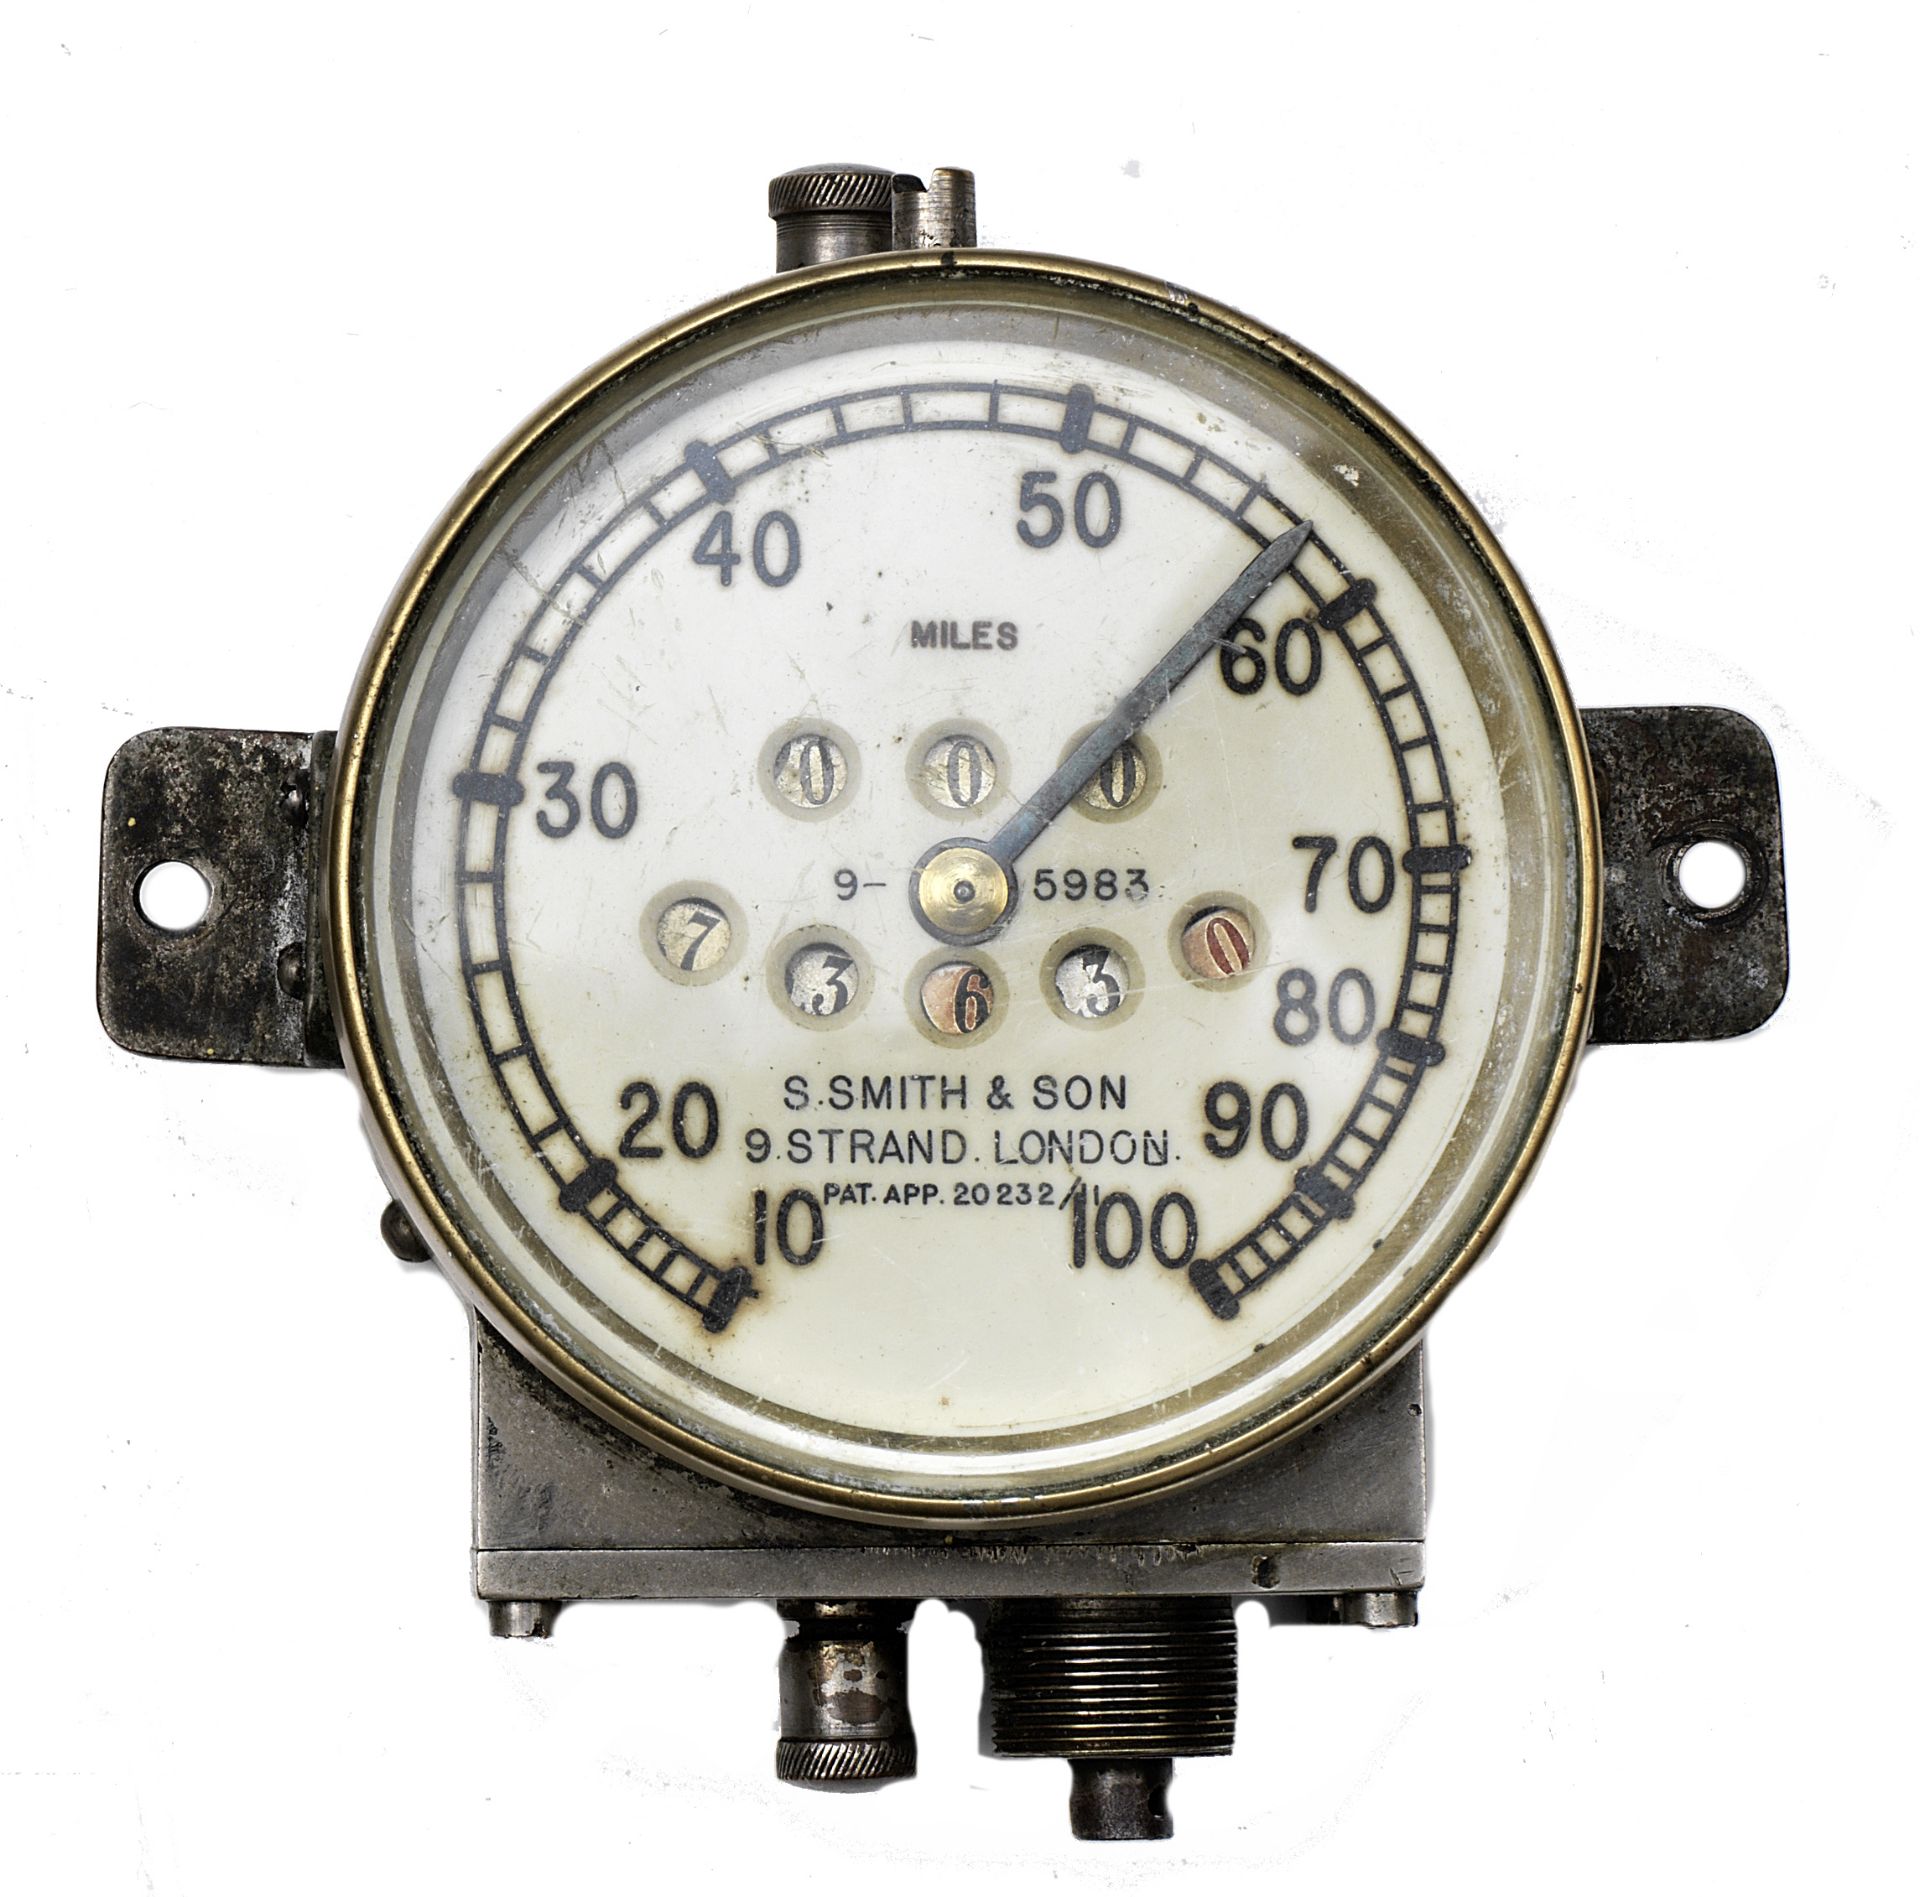 A speedometer by S. Smith & Son, Patented 1911,